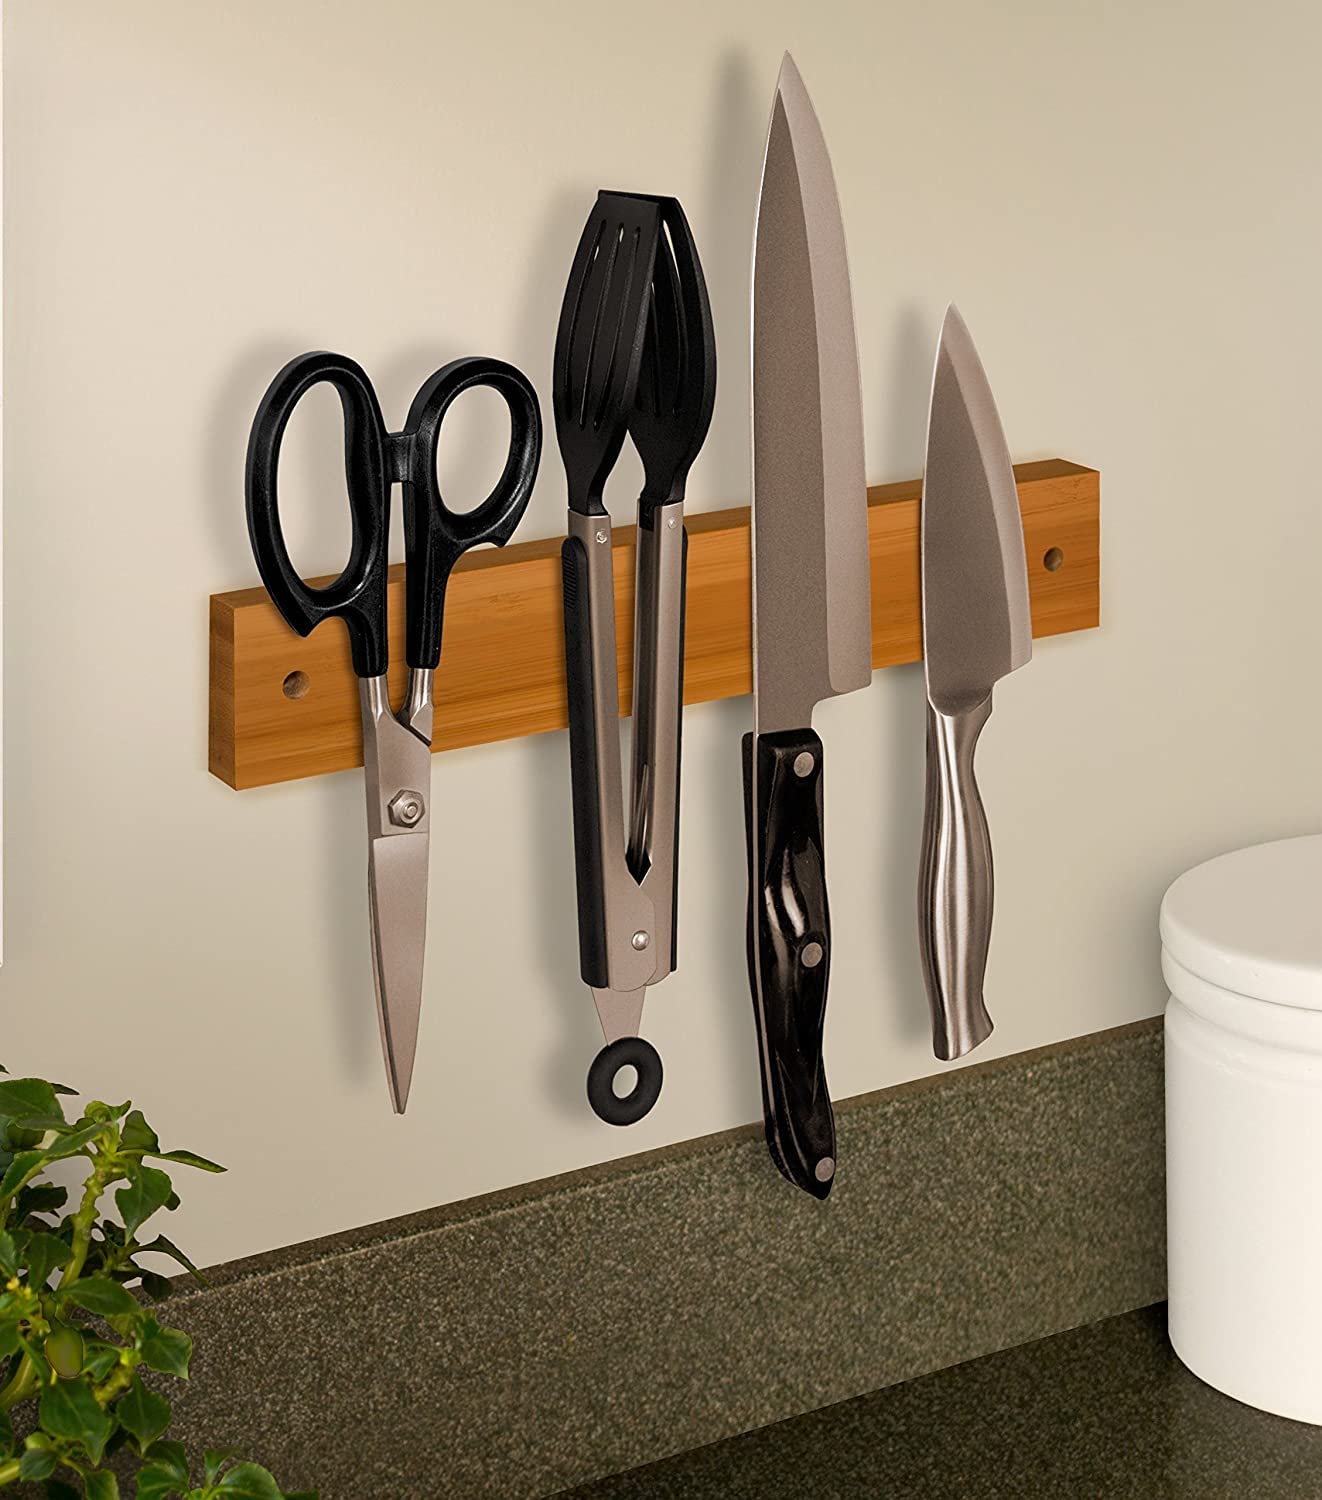 Knife Magnetic Strip, Magnetic Knife Holder for Wall, Powerful Wood Hanger Knife Bar for Kitchen Knives & Tools